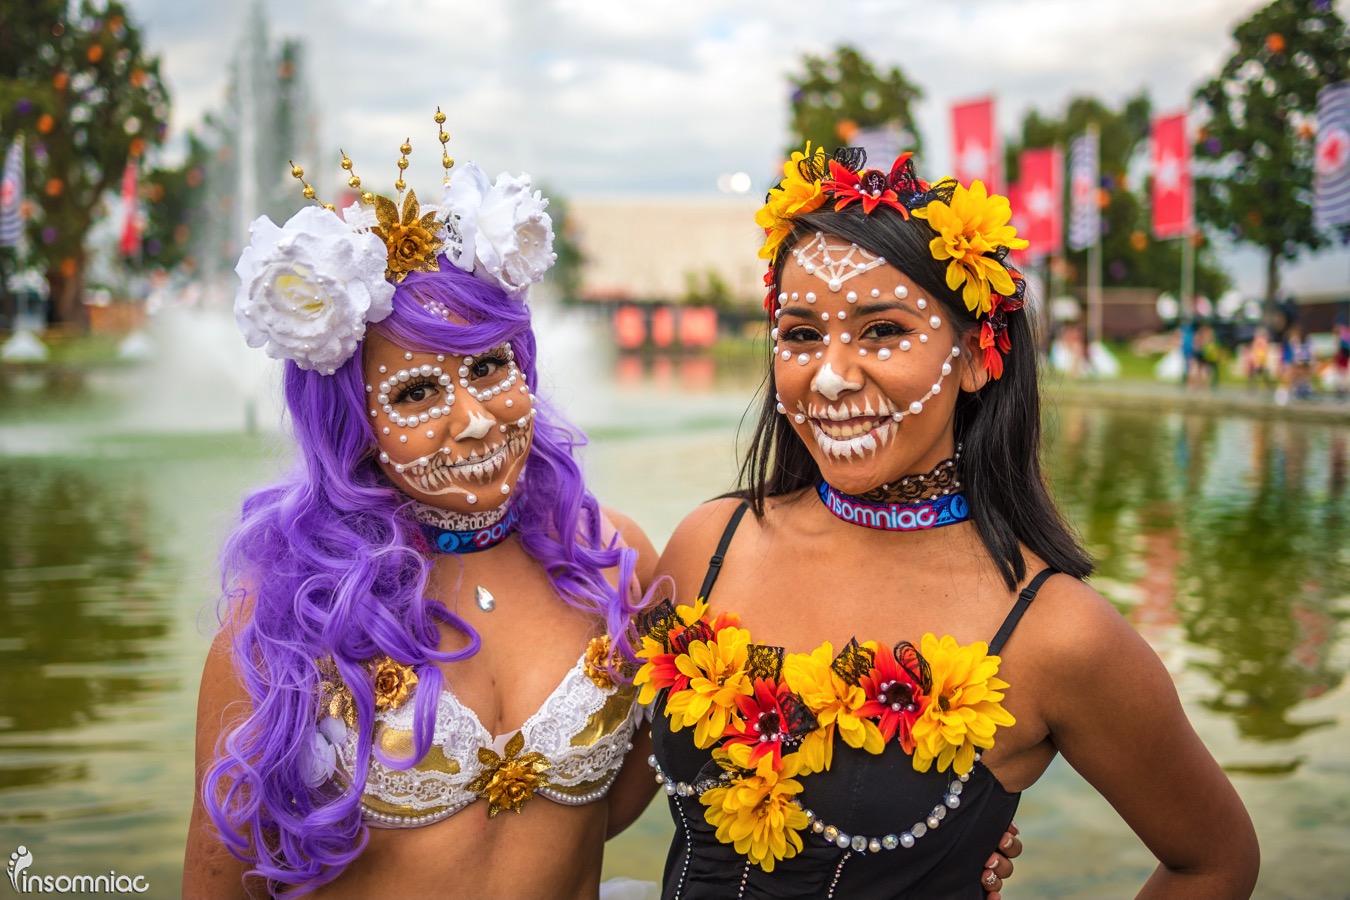 Peep the Best Headliner Outfits From EDC Las Vegas 2017